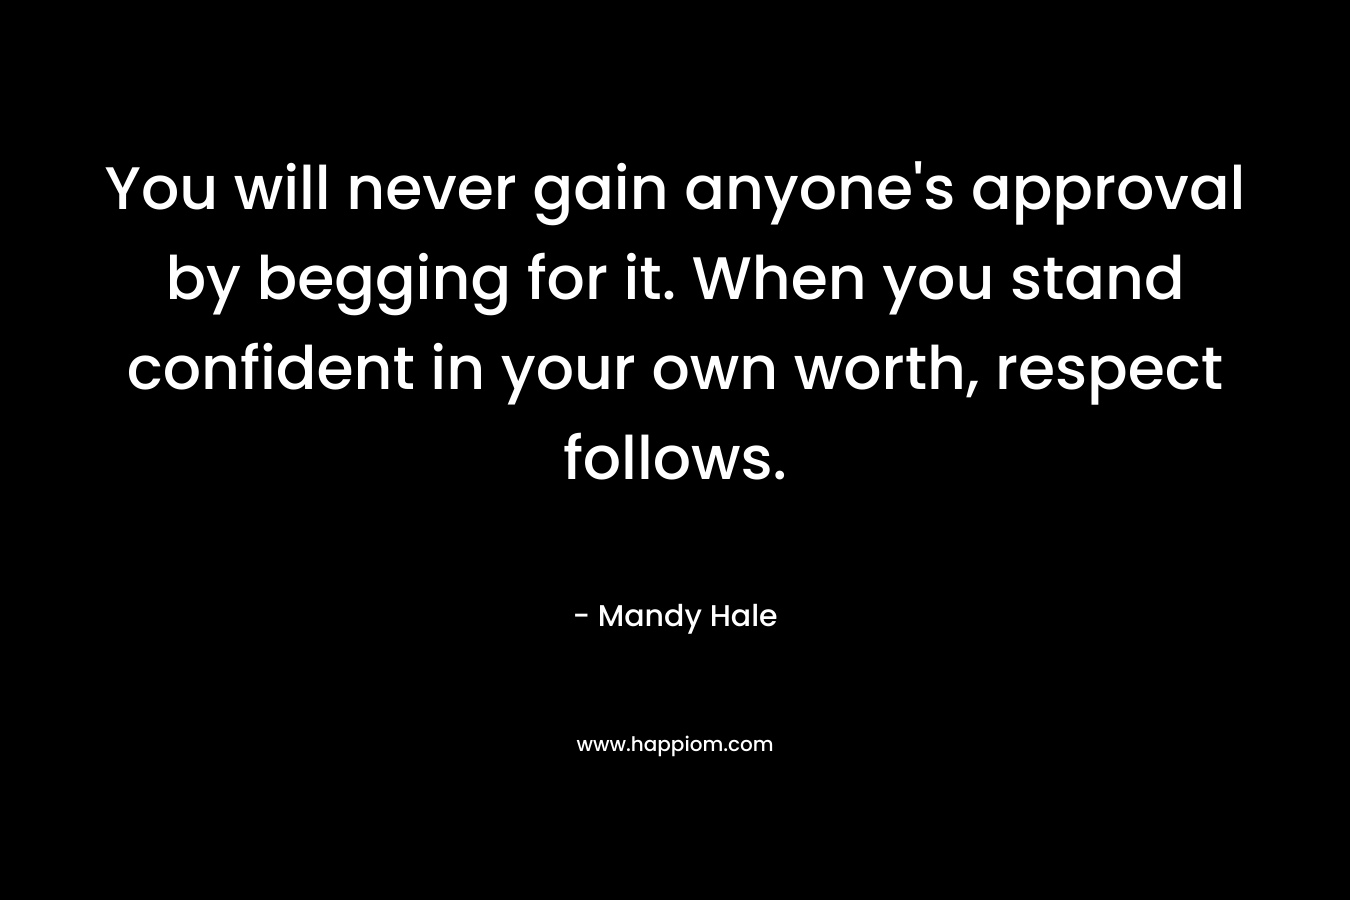 You will never gain anyone’s approval by begging for it. When you stand confident in your own worth, respect follows. – Mandy Hale